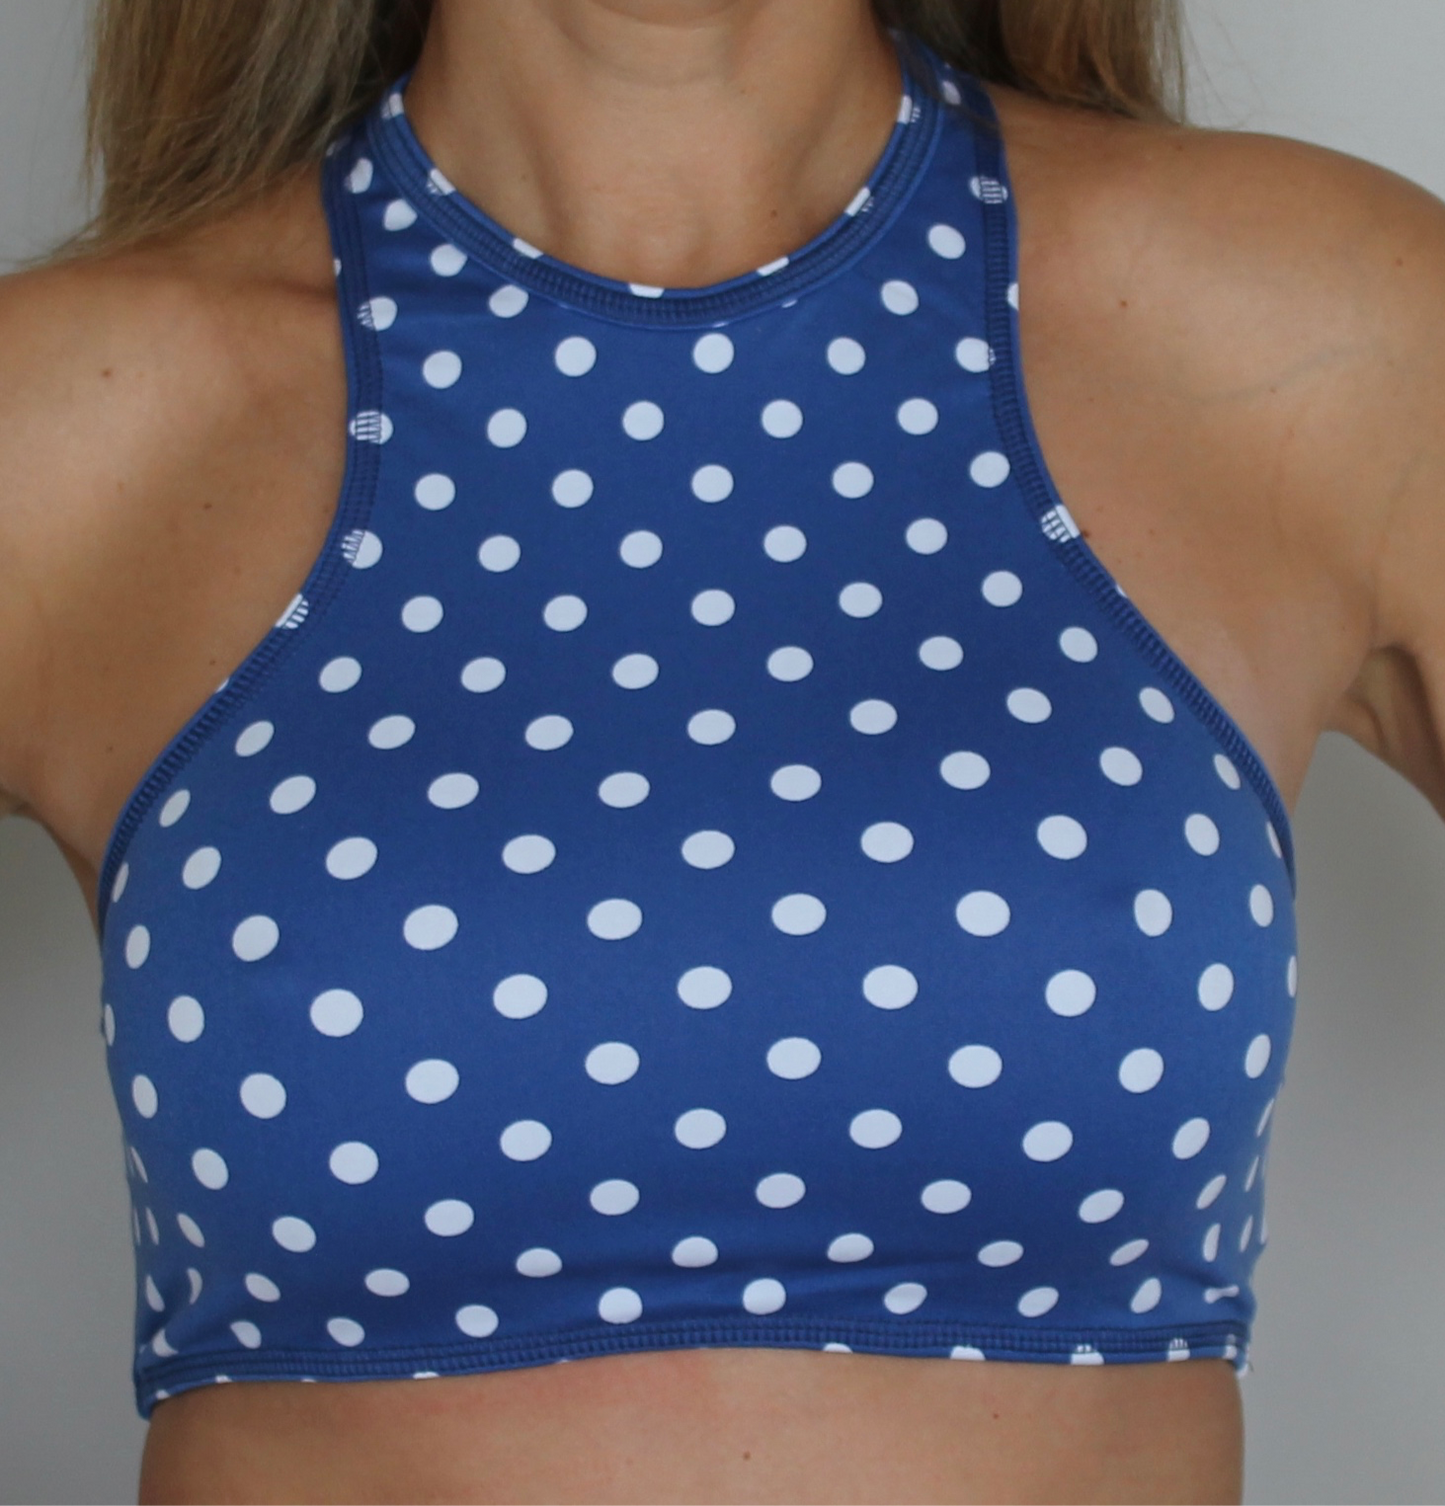 Royal blue and white polka dots high neck and racer back top